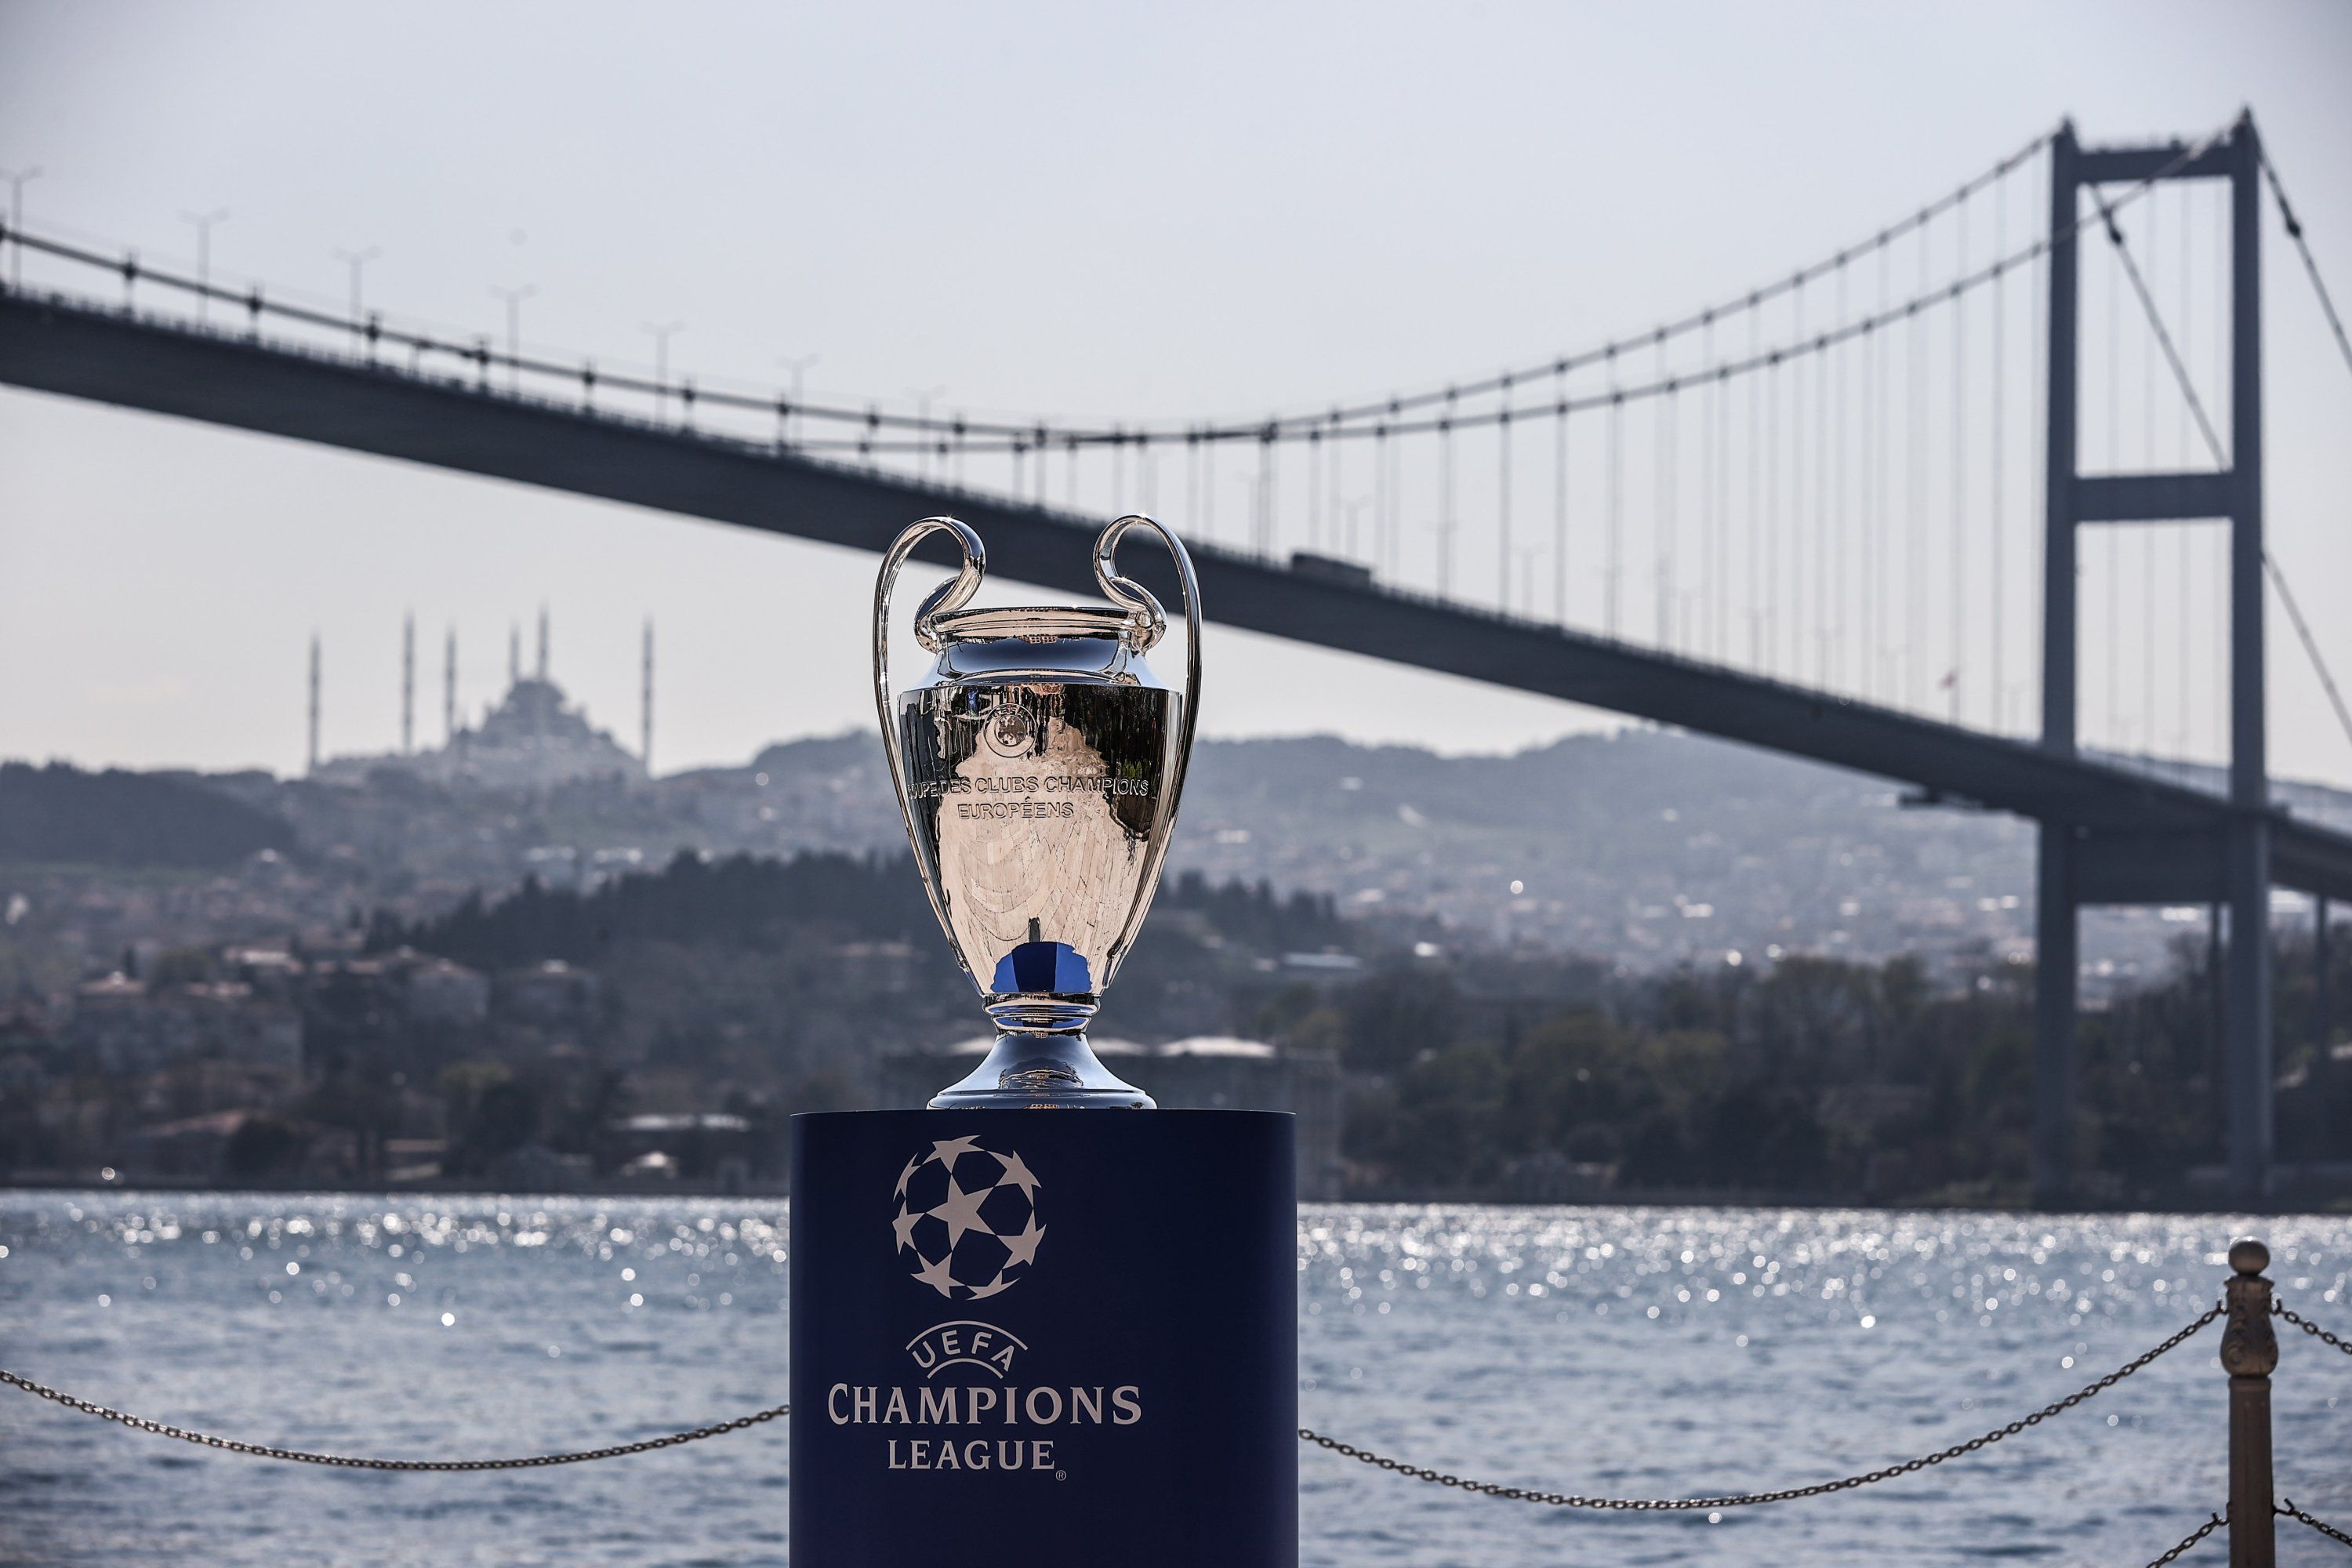 UEFA Champions League trophy arrives in Istanbul ahead of final